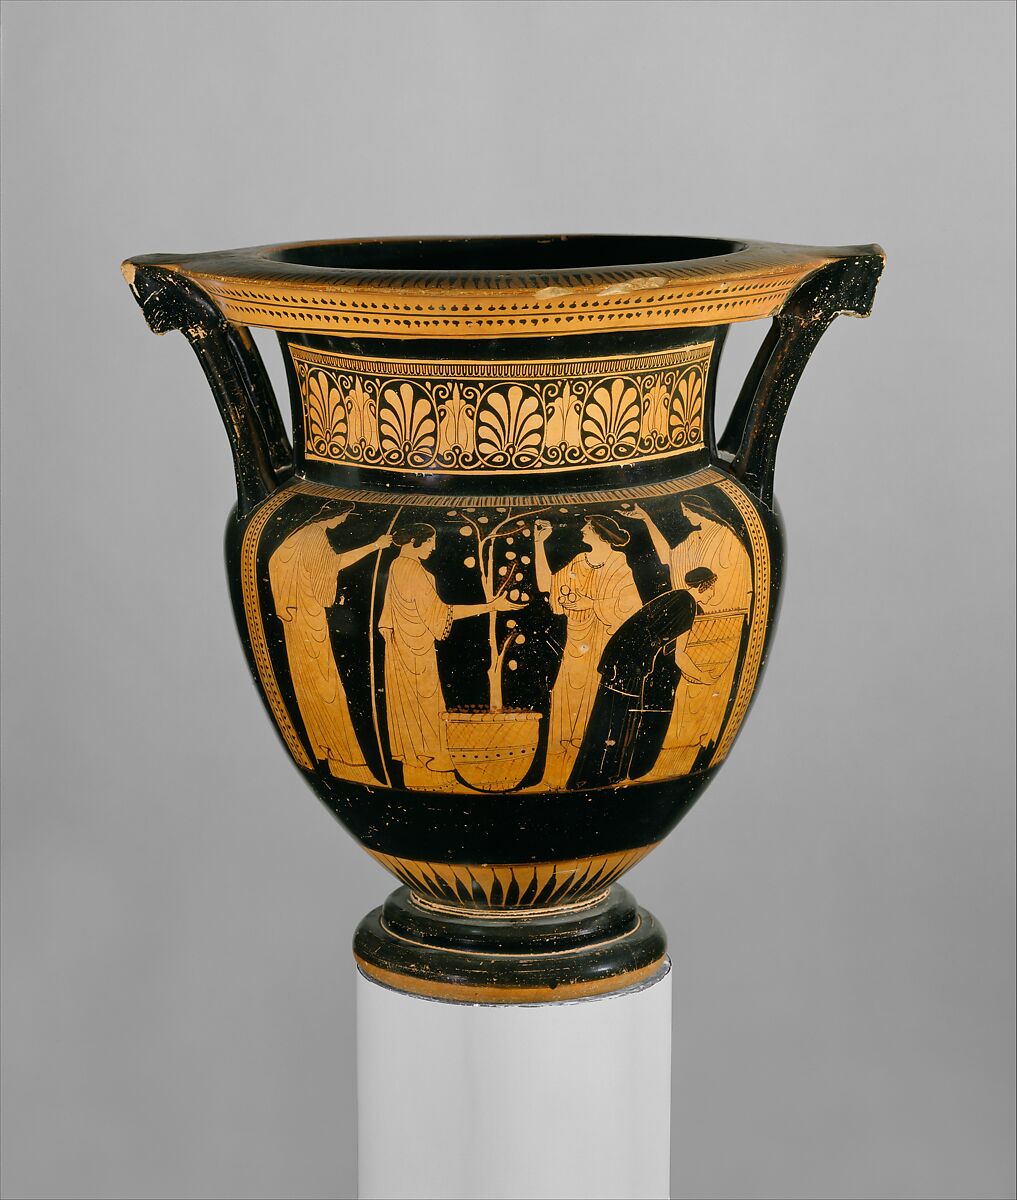 Terracotta column-krater (bowl for mixing wine and water), Attributed to the Orchard Painter, Terracotta, Greek, Attic 